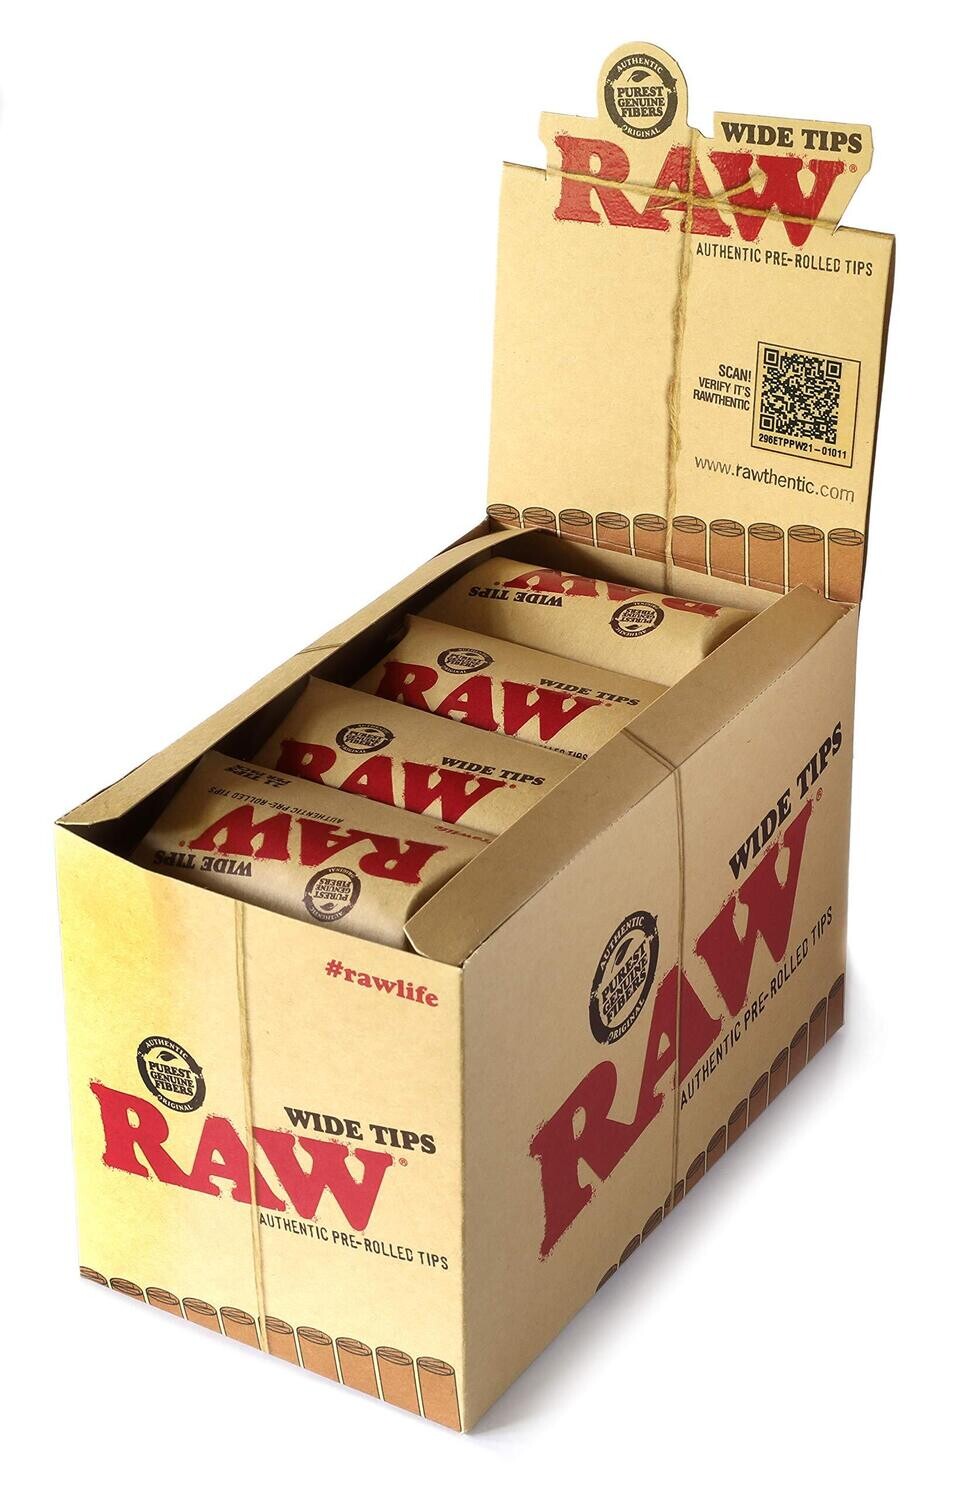 RAW PRE-ROLLED TIPS WIDE